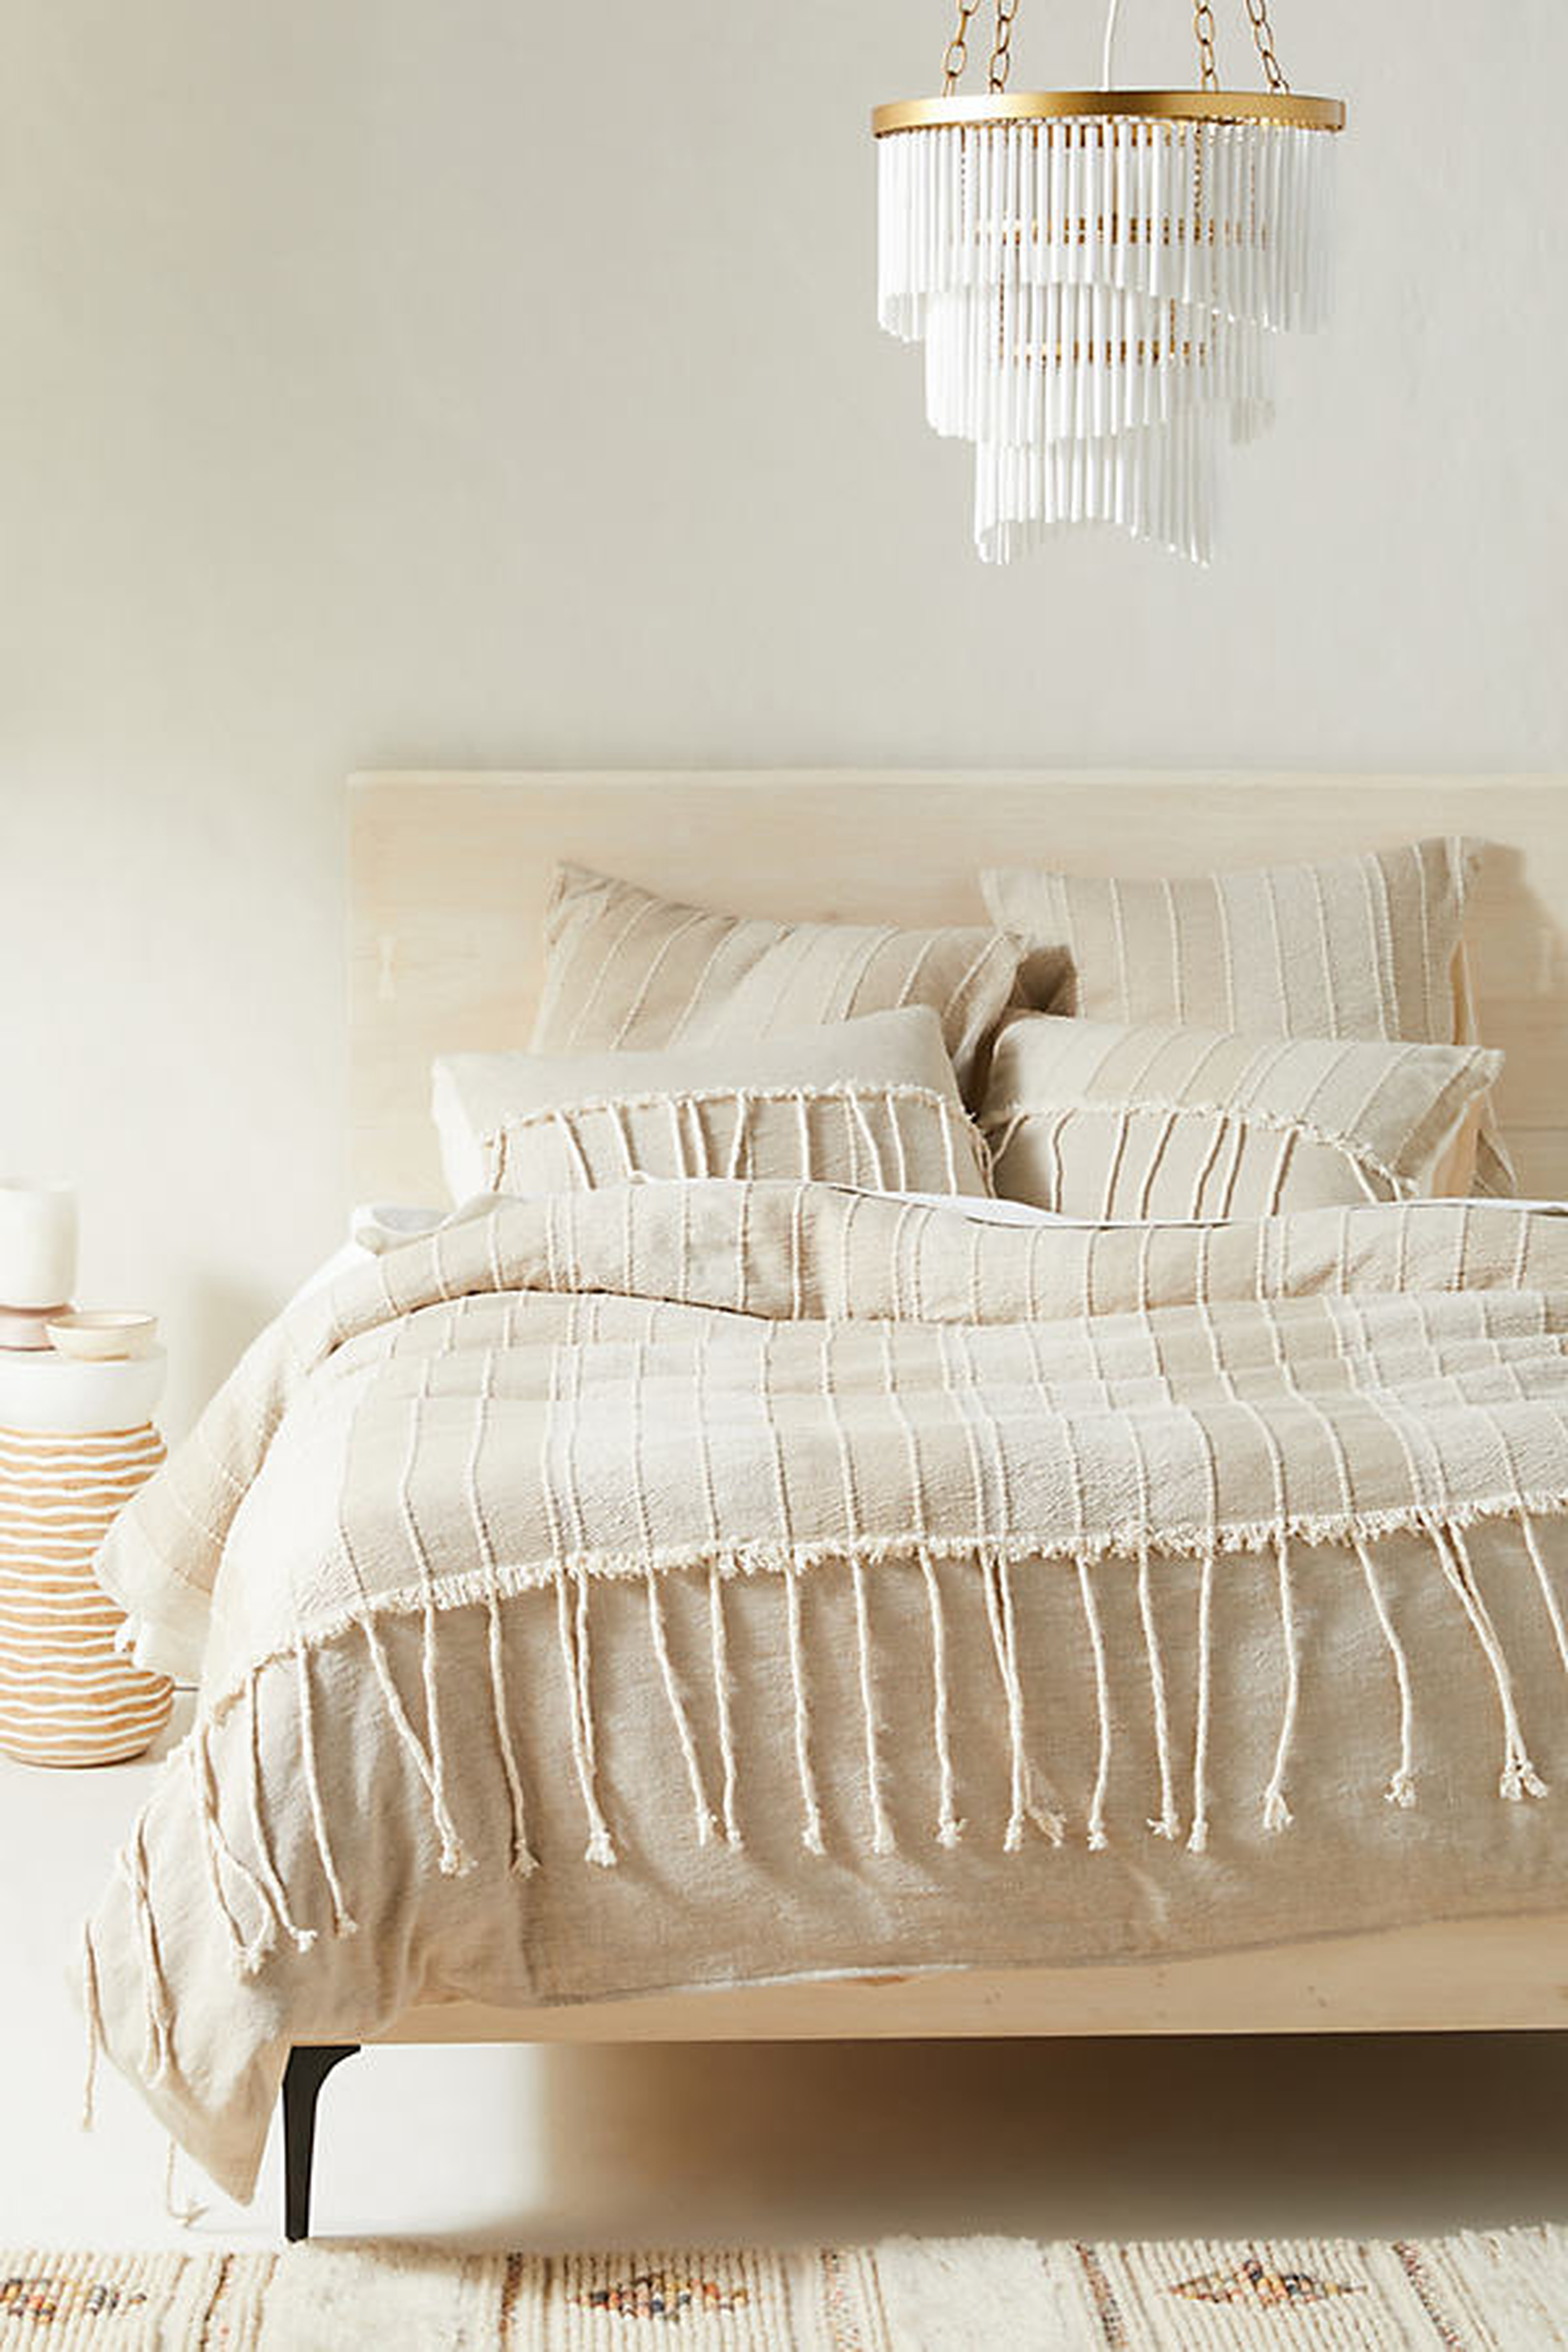 Woven Etta Duvet Cover By Anthropologie in Beige Size KG TOP/BED - Anthropologie